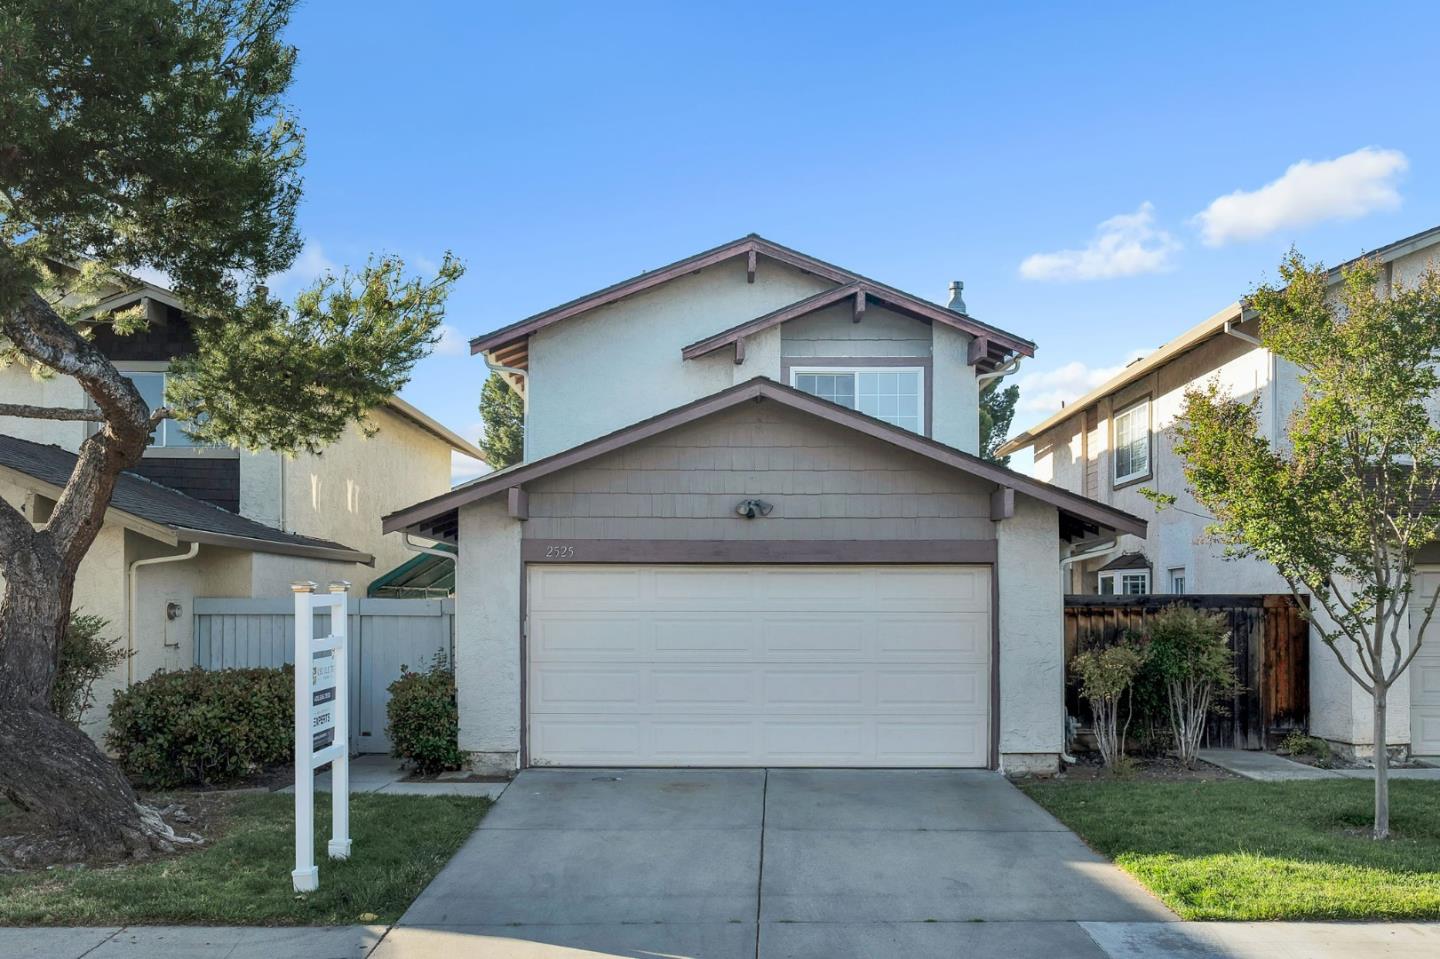 Photo of 2525 Home Crest Dr in San Jose, CA